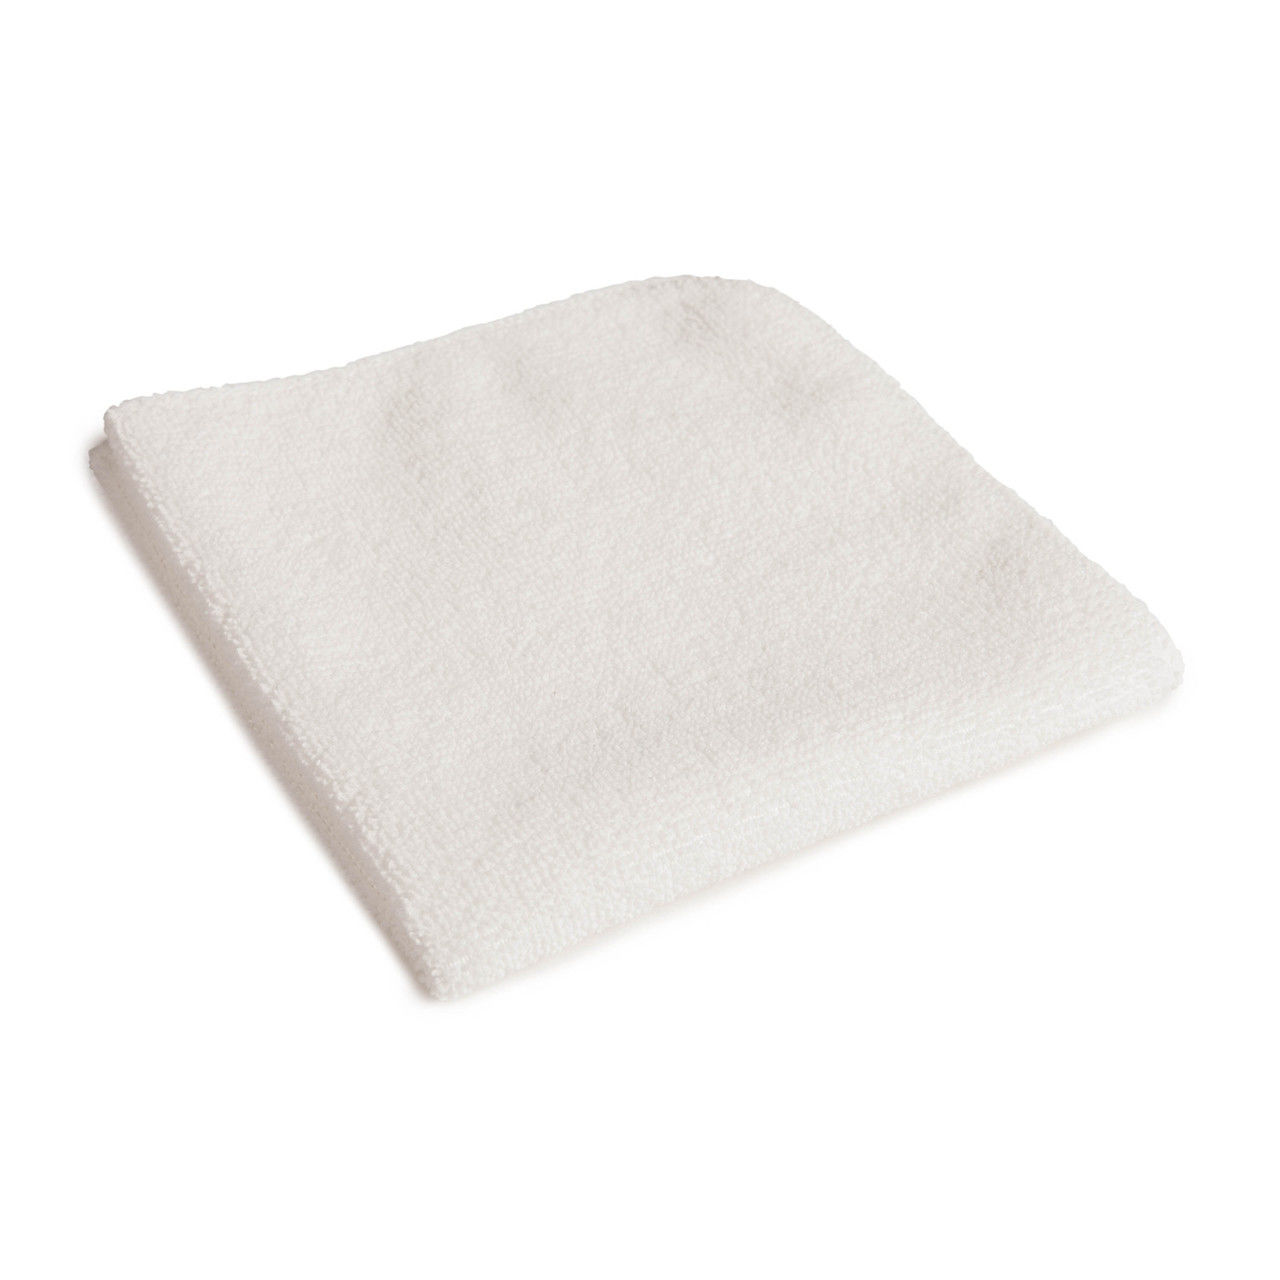 How can one truly experience the soft texture of dairy towels microfiber washcloth?